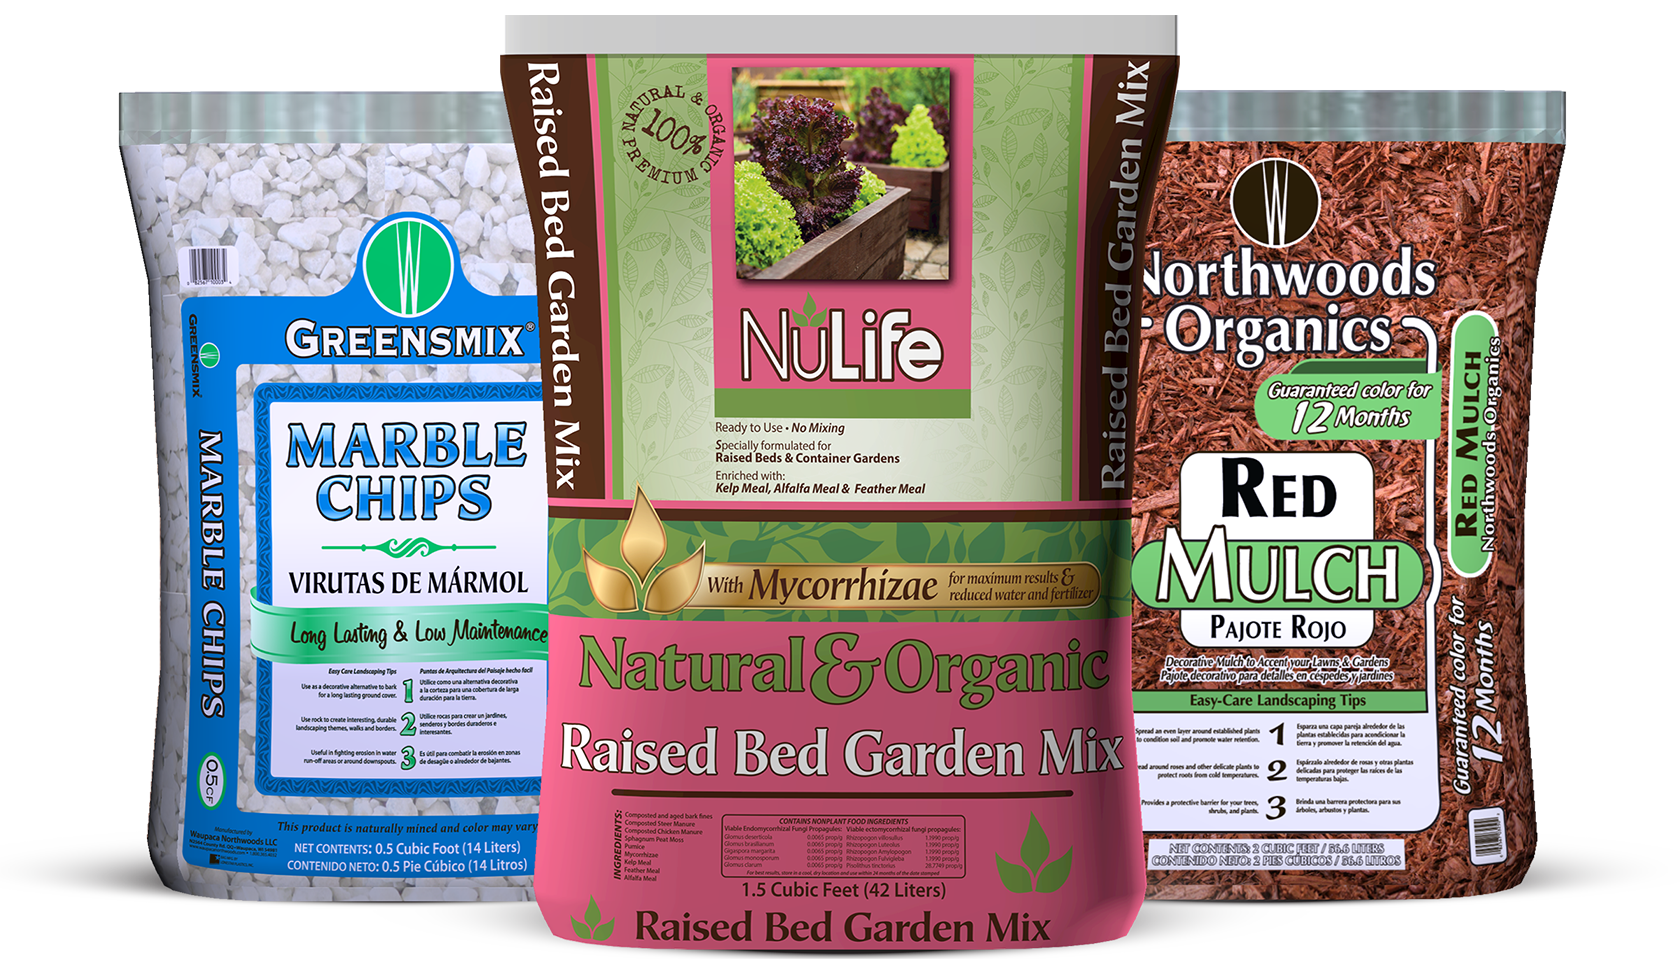 Product bags of Greensmix Marble Chips, NuLife Natural & Organic Raised Bed Garden Mix and Northwoods Organics Red Mulch